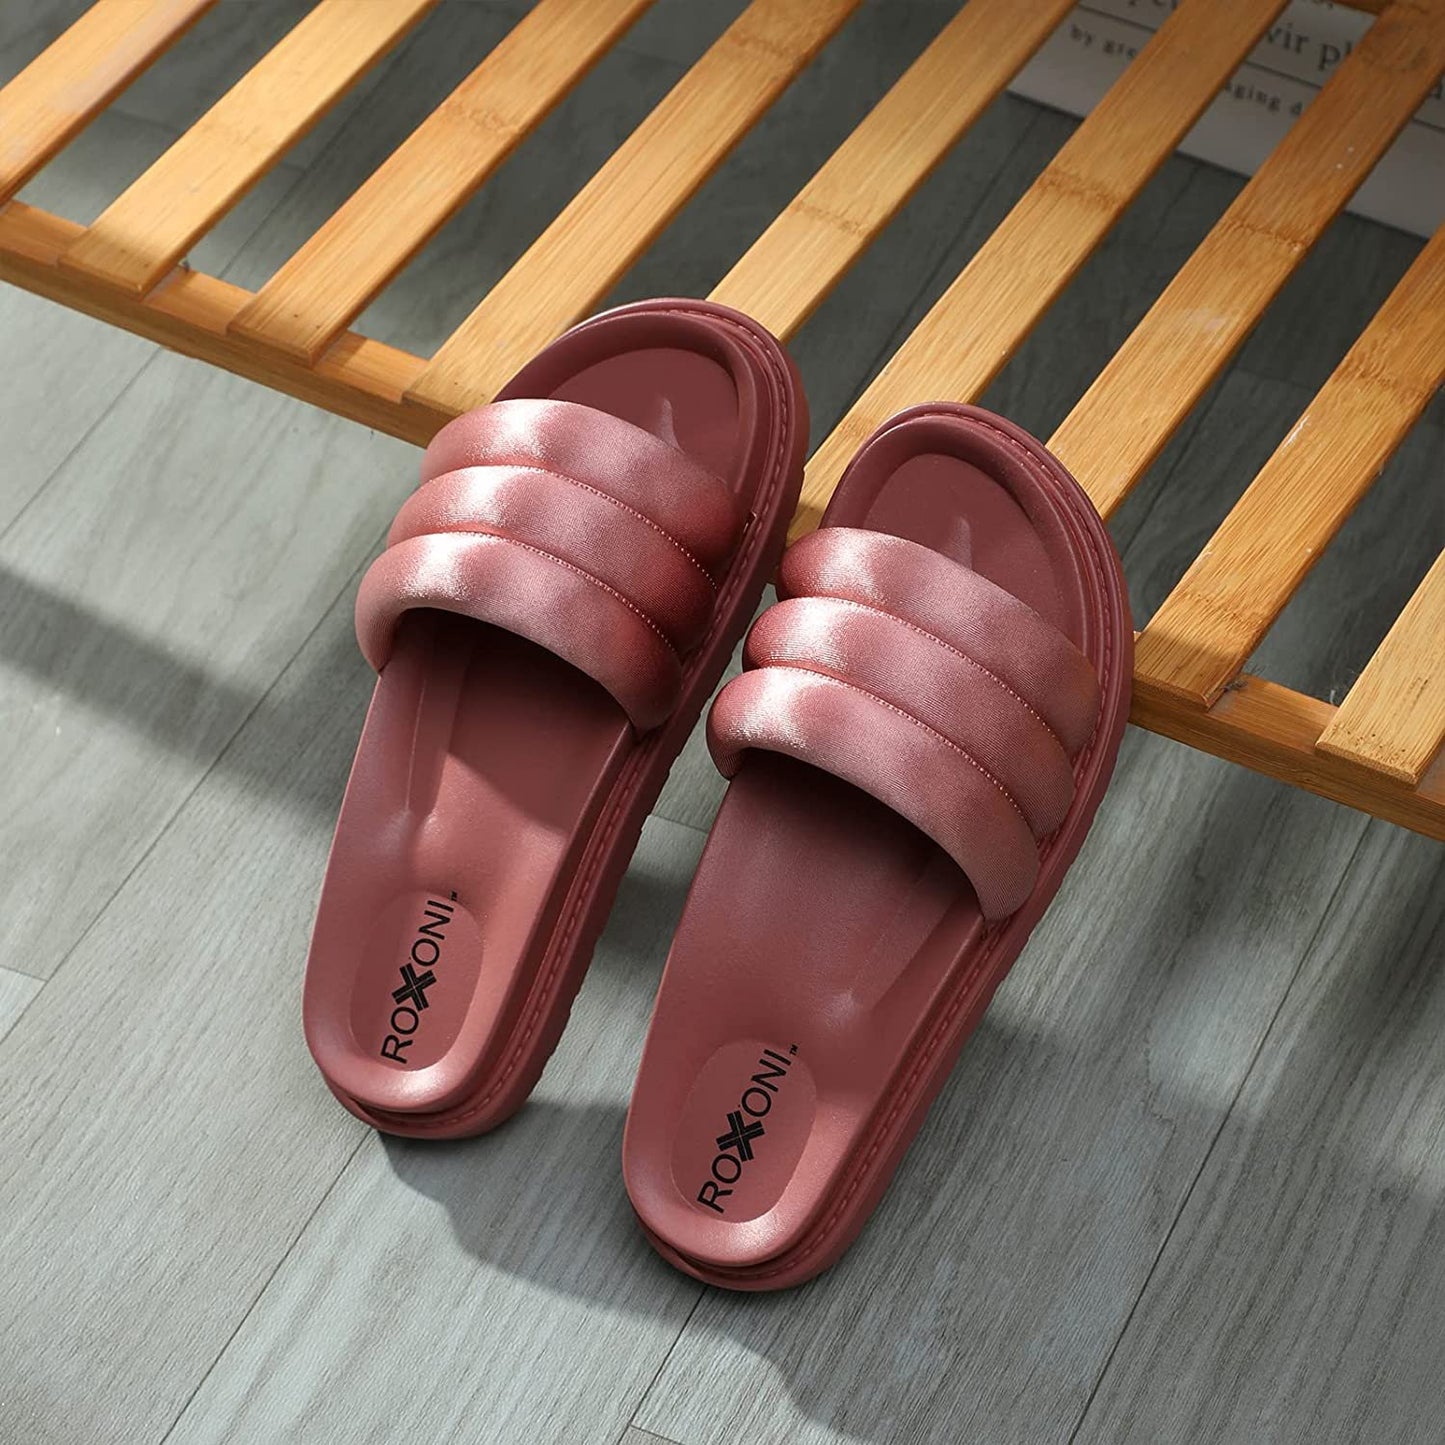 Women’s Padded Strap Slide Sandals; Stylish Open Toe Sandals in 4 Fashionable Colors